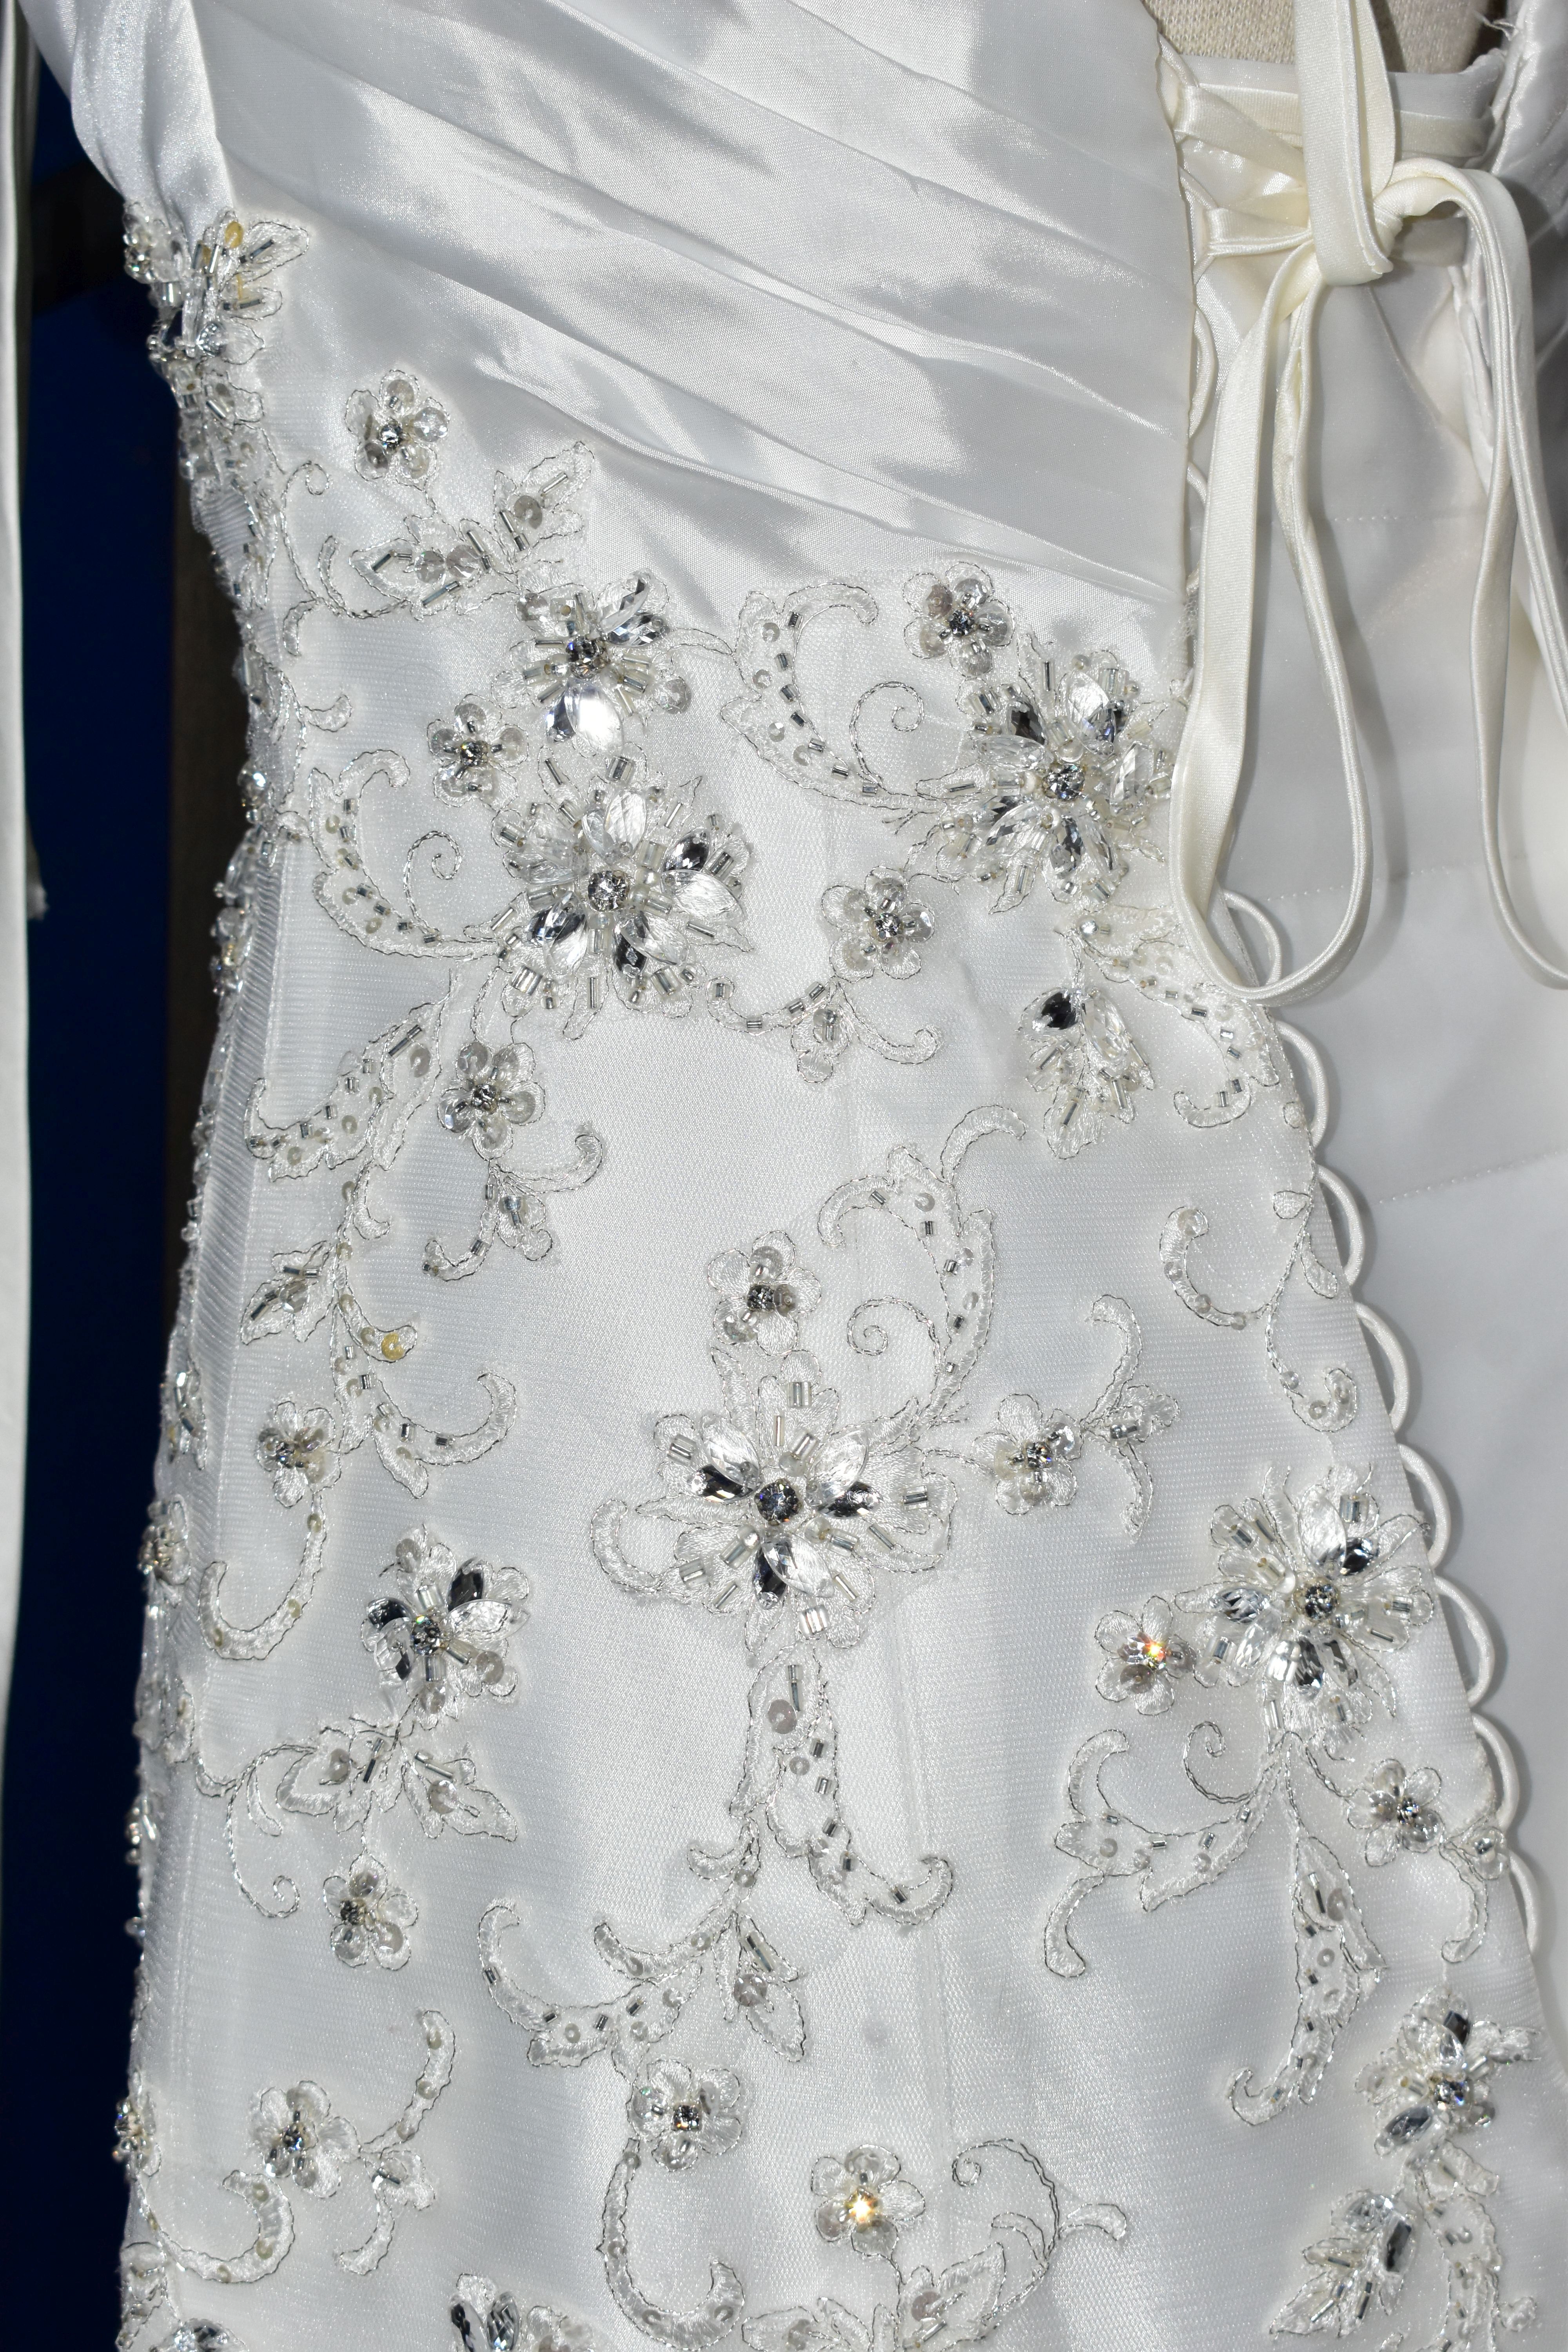 WEDDING GOWN, 'Sophia Tolli' white satin, size 8, strapless, ruched skirt, beaded detail on - Image 16 of 17